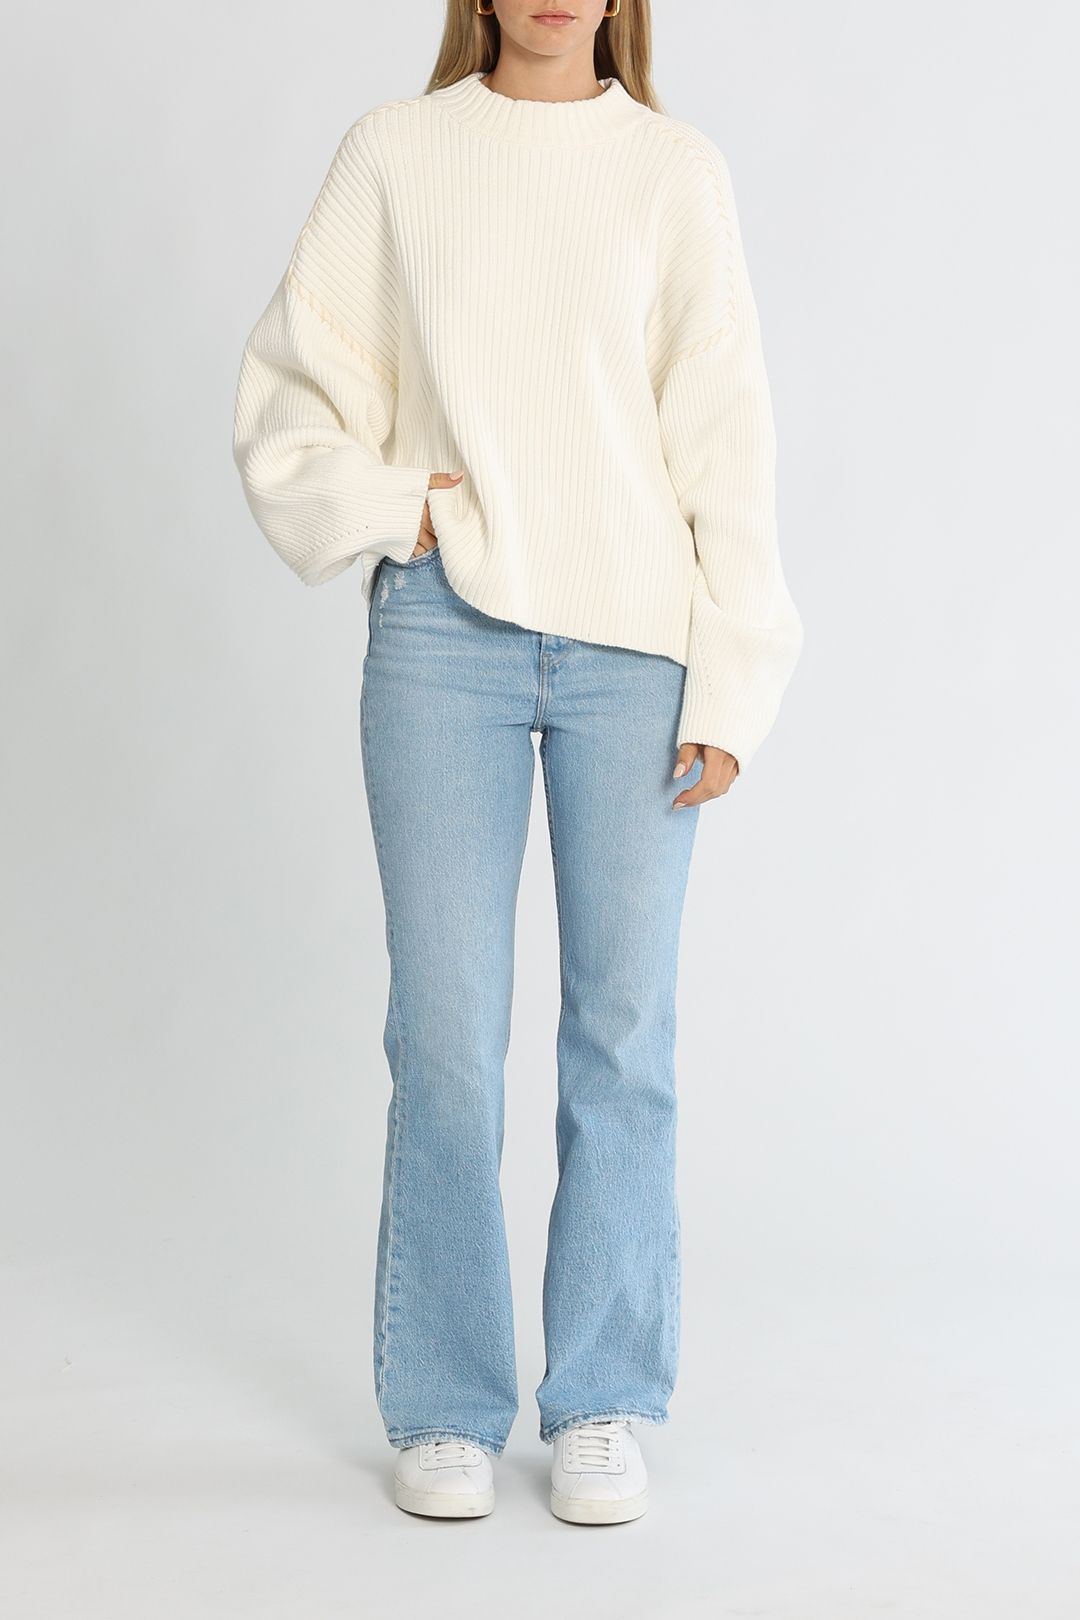 C&M Camilla and Marc Ray Knit Crew Frost